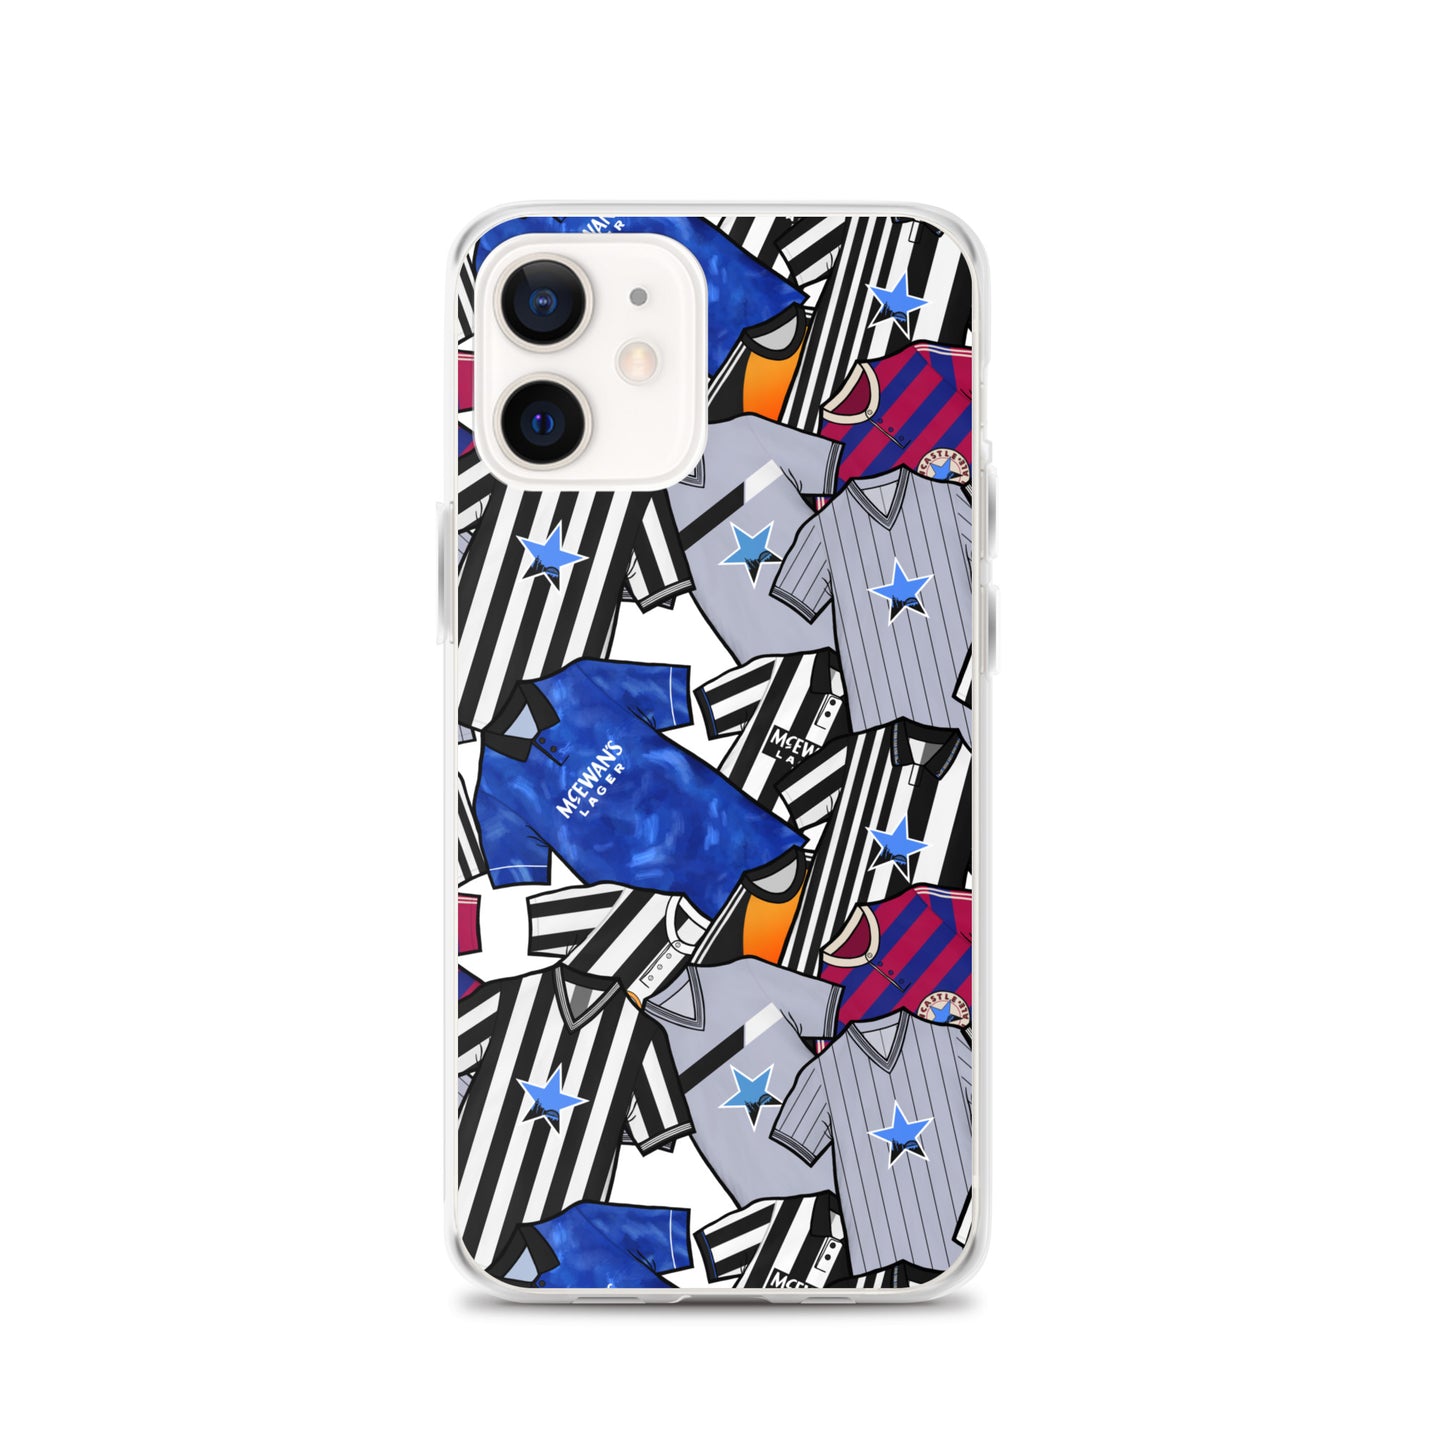 Phone case for iPhone 12 Inspired by the Retro shirts of Newcastle United!